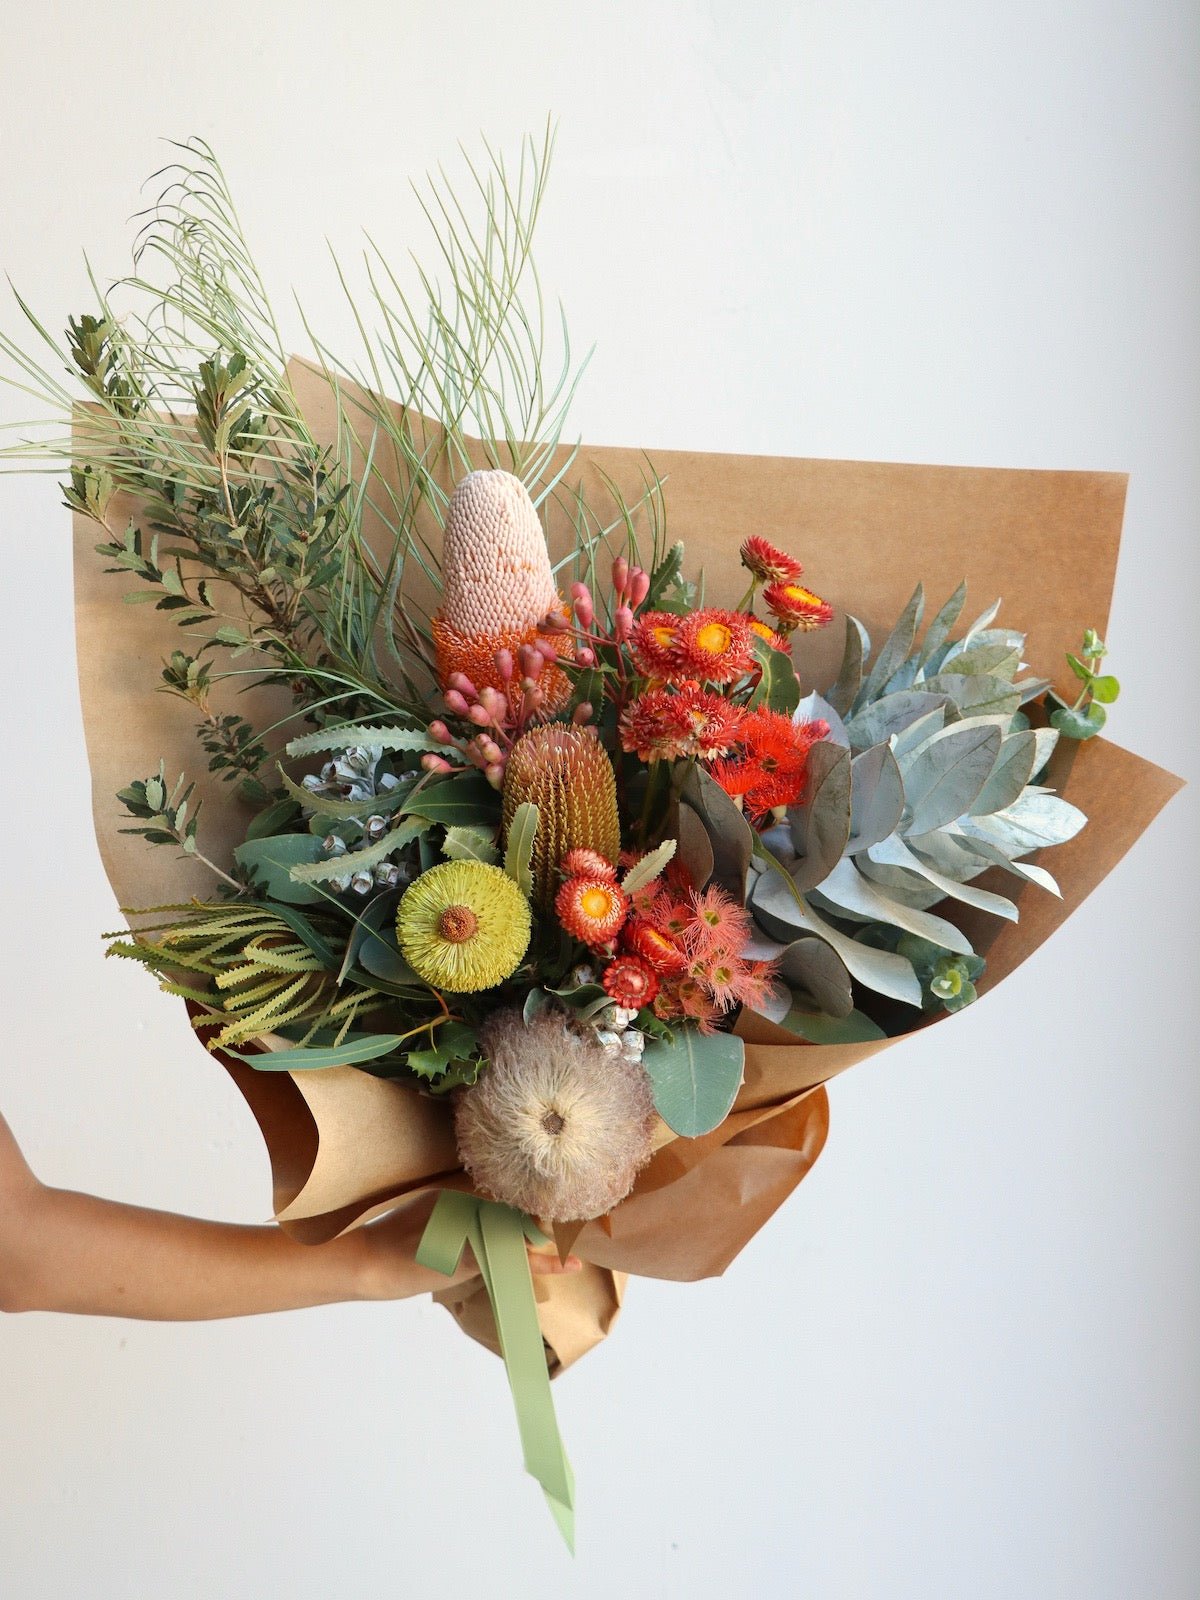 A Large size Australian native bouquet of flowers. The flowers include possum banksia, banksia menziesii, banksia prinotes, paper daisies, macrocarpa and flowering gum.